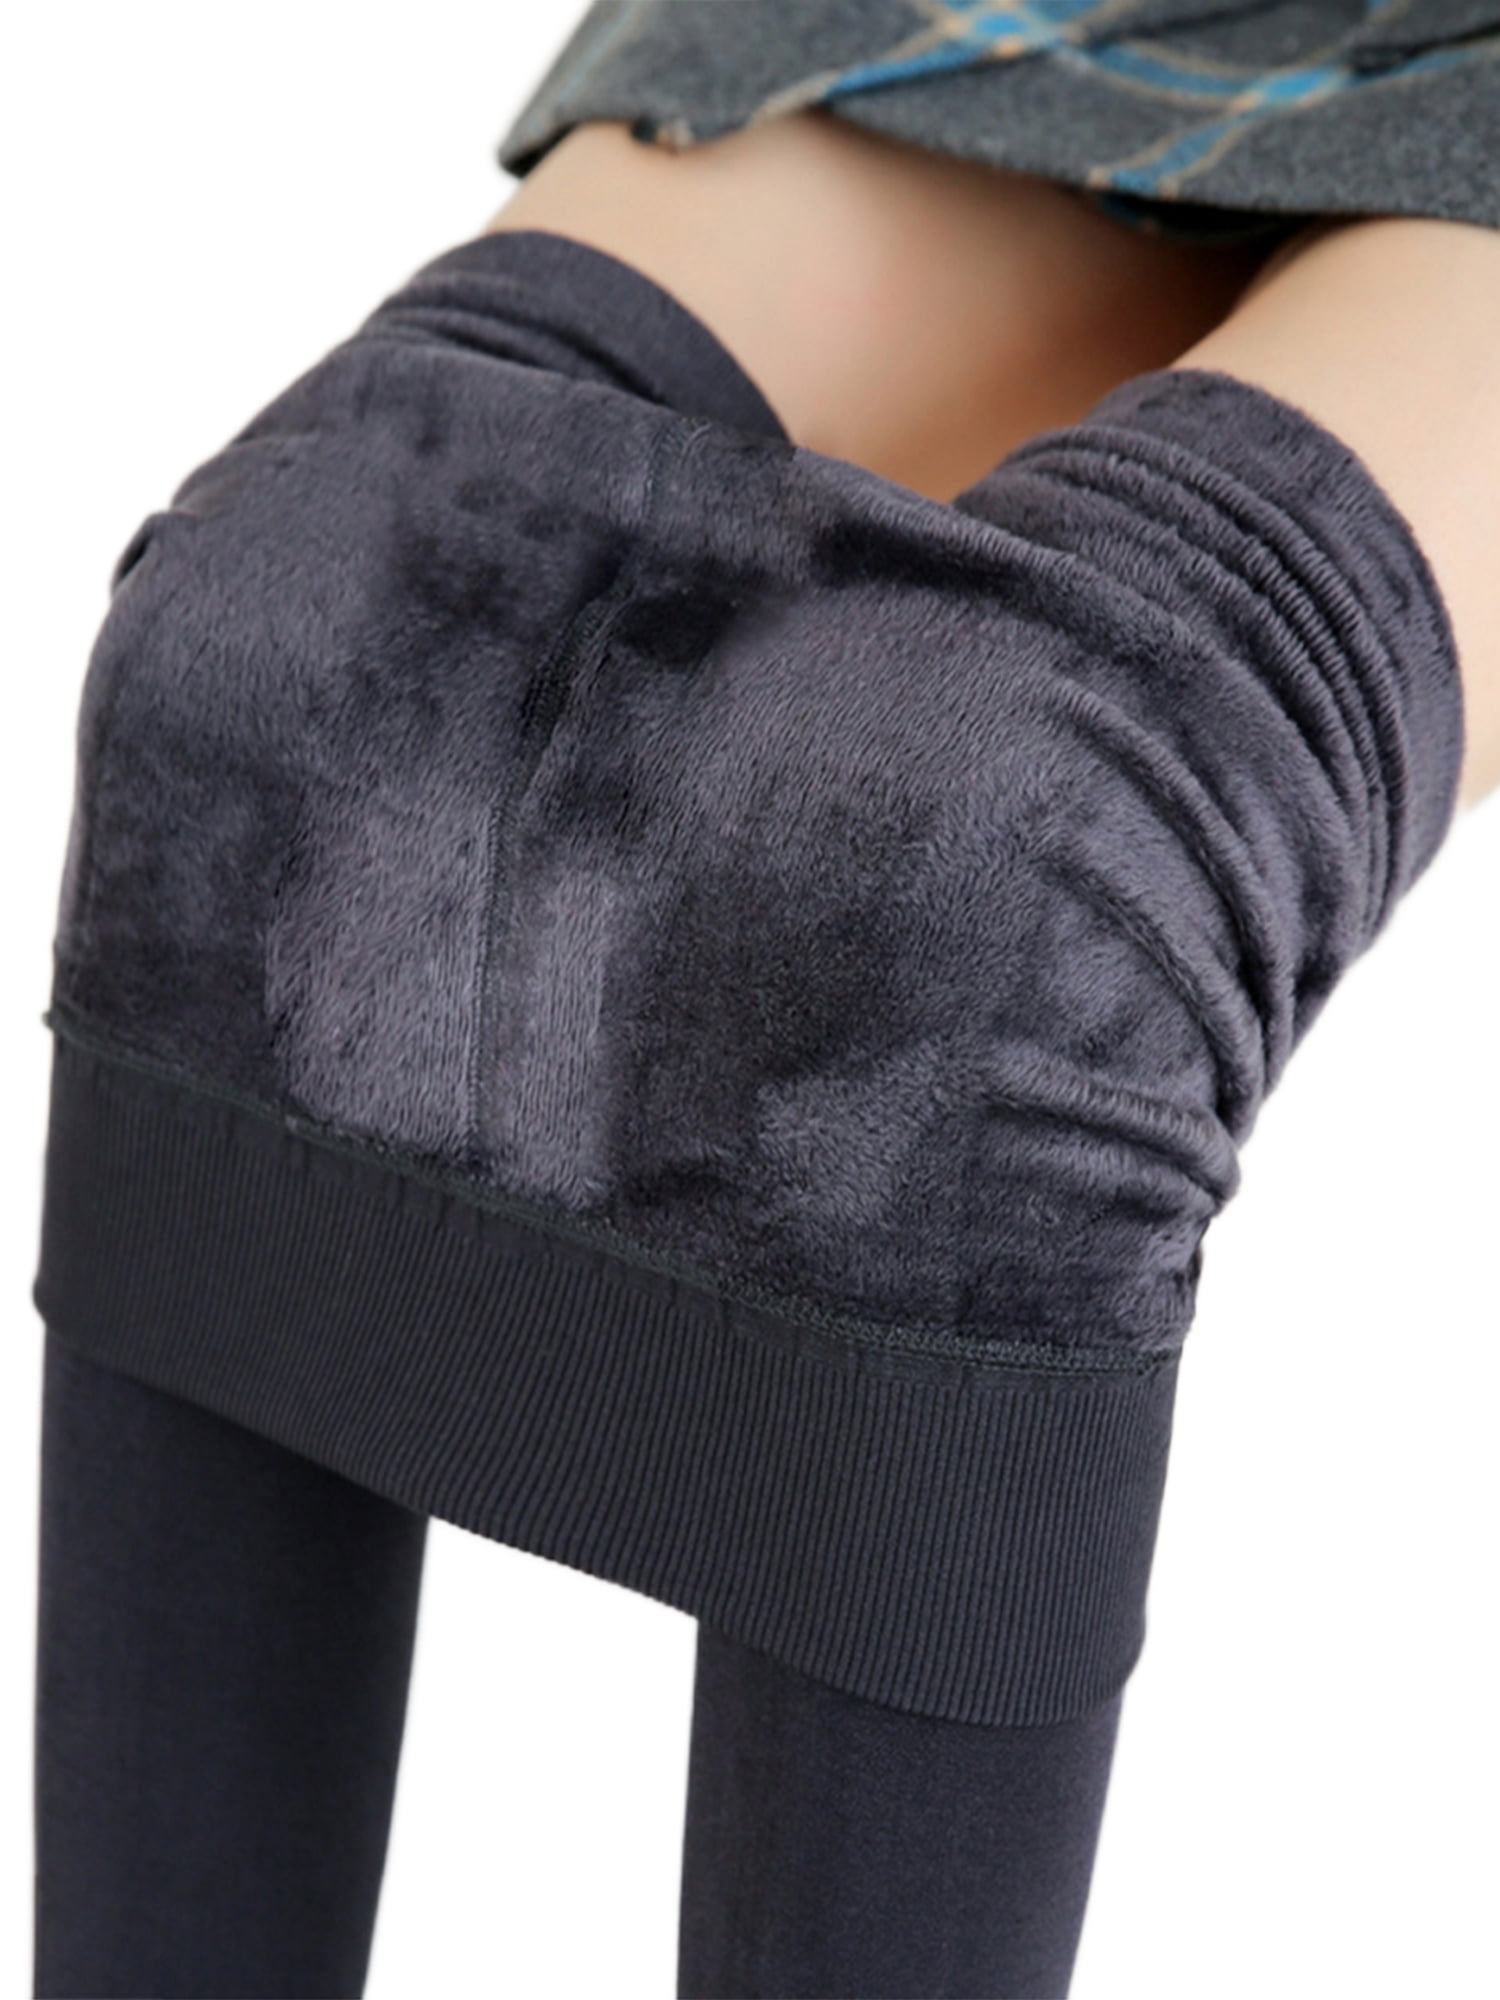 Frontwalk Woemen Thicken Plush Solid Color Leggings Elastic Waisted Skinny  Thermal Long Johns Ladies Fleece Lined Workout Underwear Bottoms Coffee 2XL  